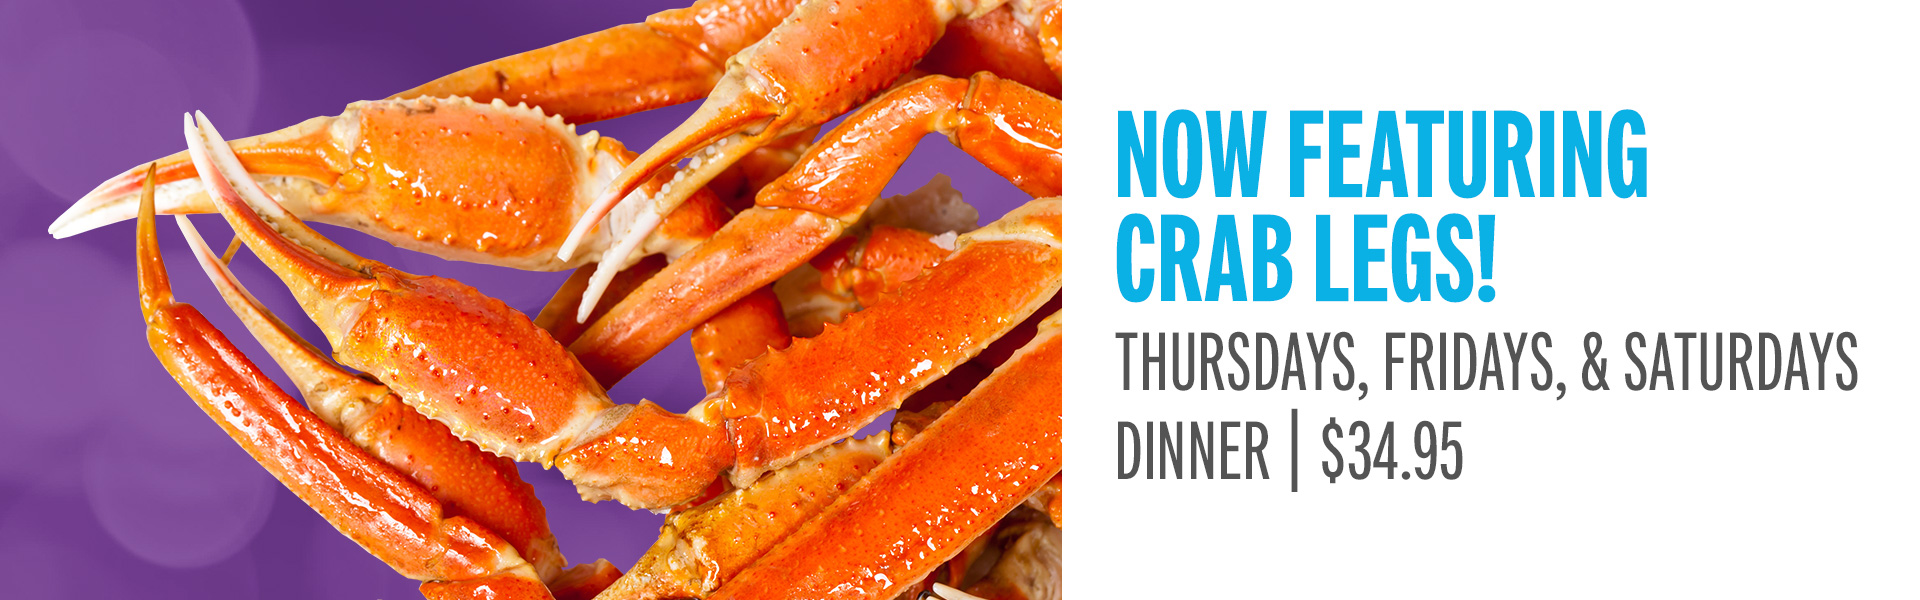 Native Harvest Buffet now featuring crab legs Thursdays, Fridays, and Saturdays!